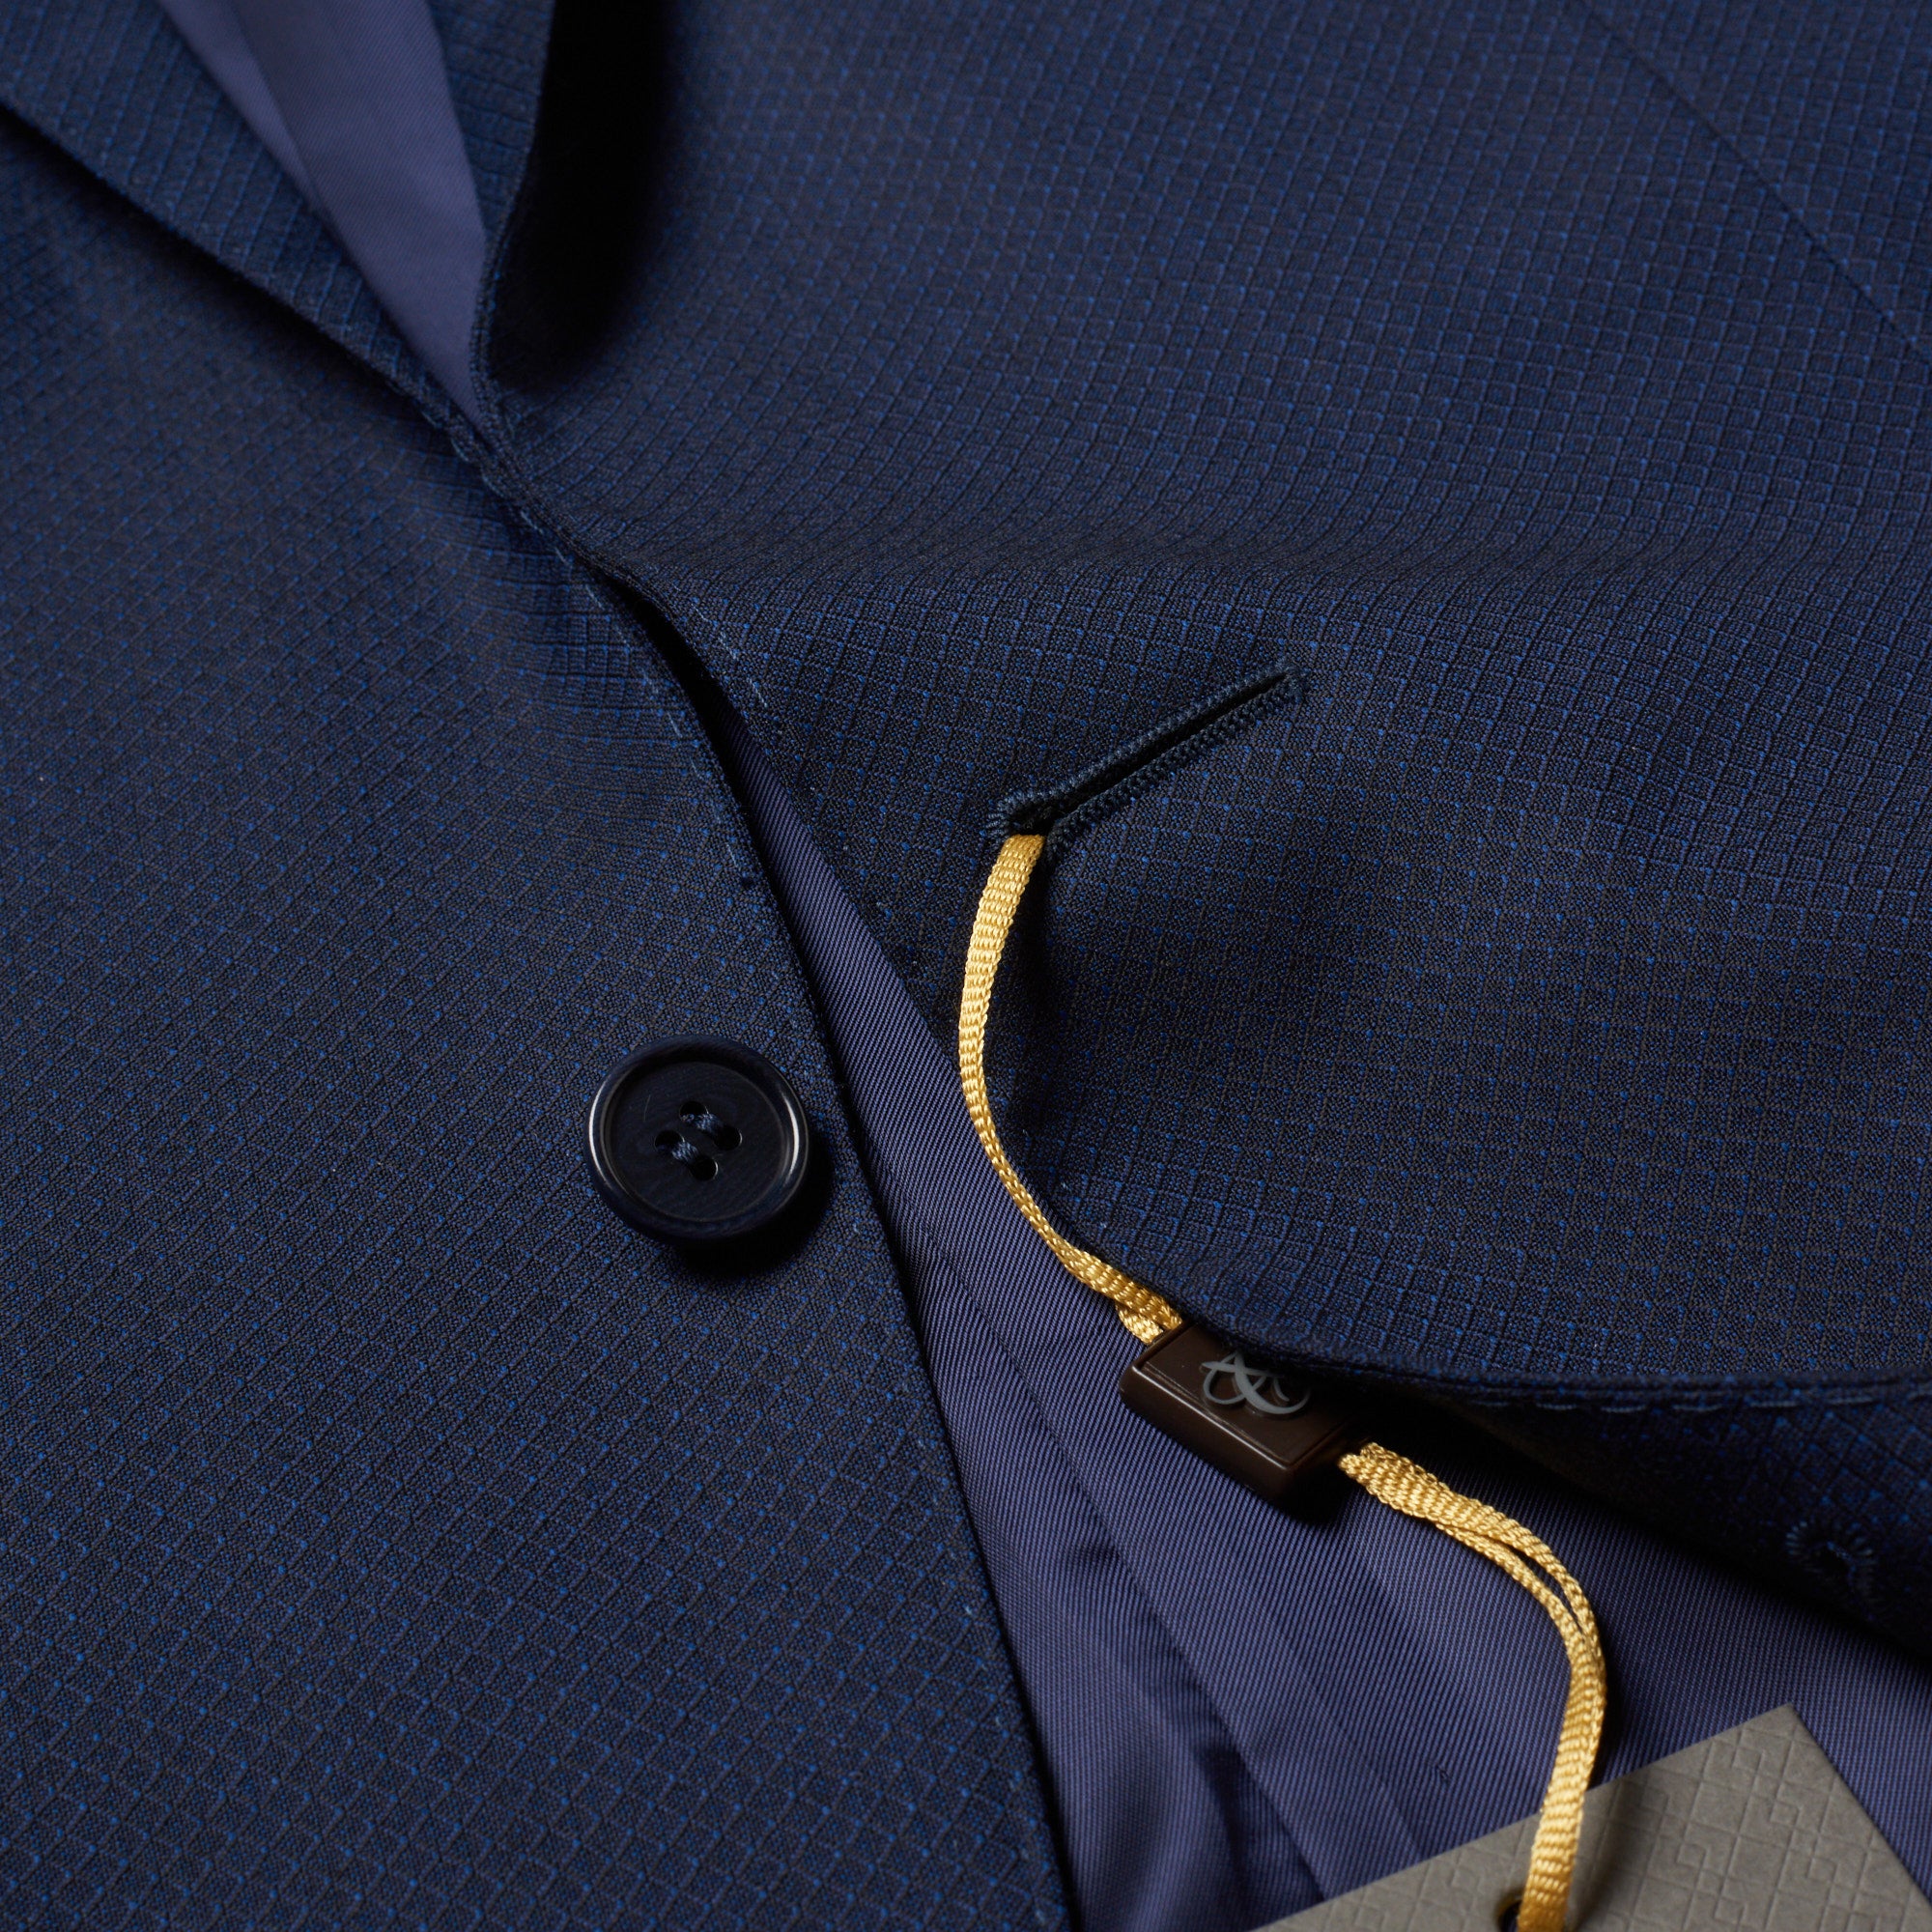 Suit Jacket Navy Blue Wool Cloth